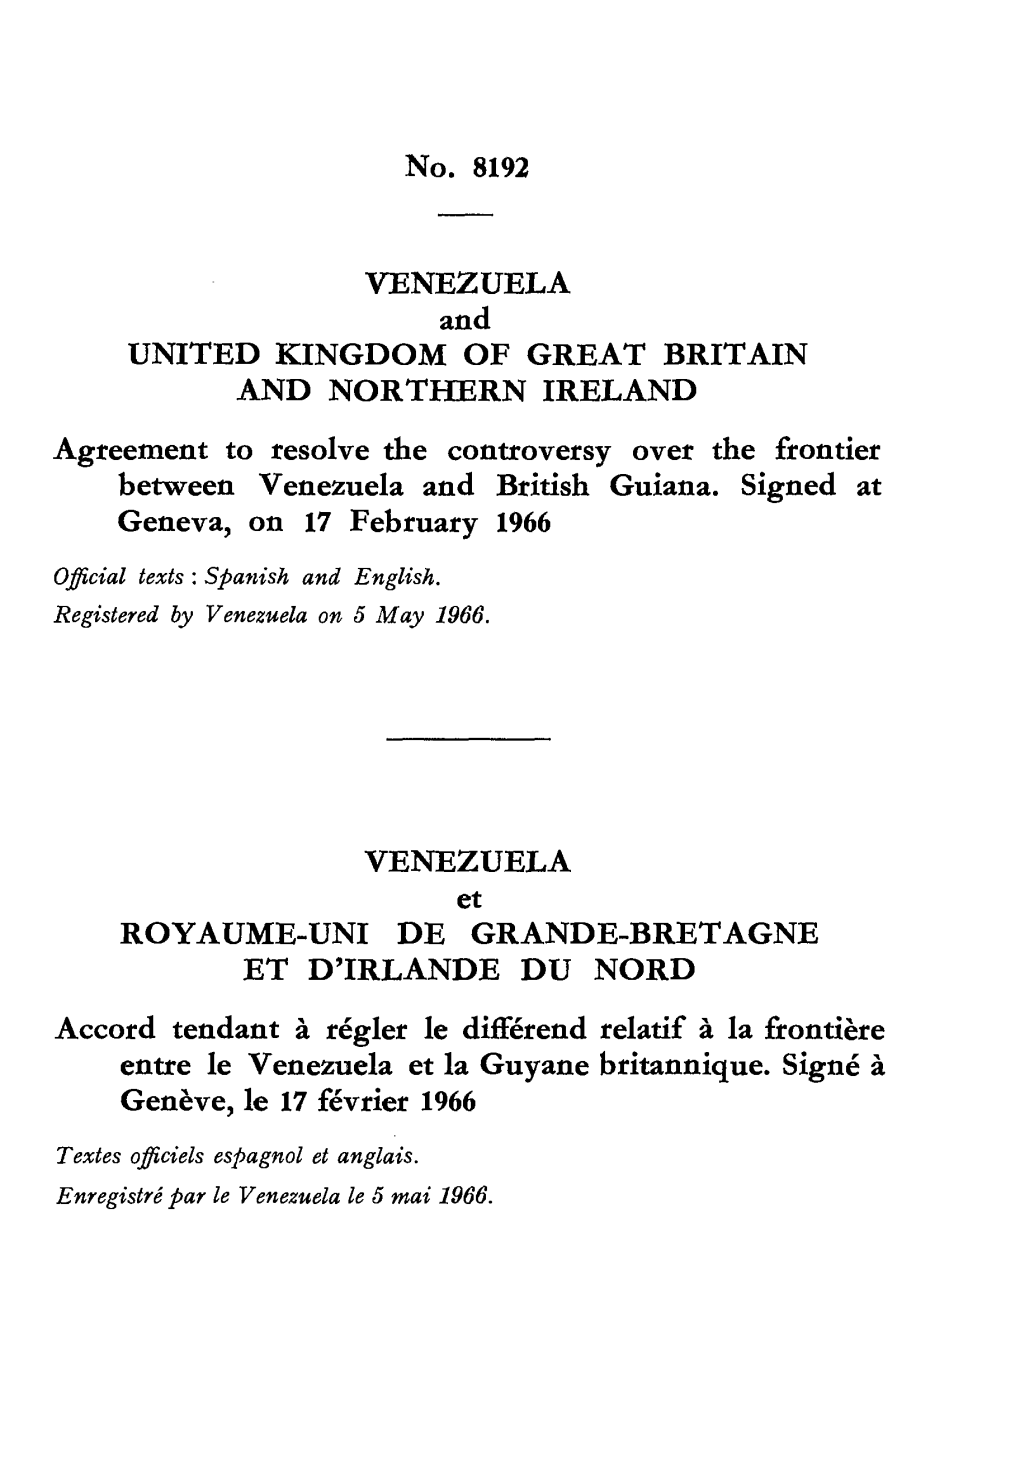 VENEZUELA and UNITED KINGDOM of GREAT BRITAIN and NORTHERN IRELAND Agreement to Resolve the Controversy Over the Frontier Between Venezuela and British Guiana